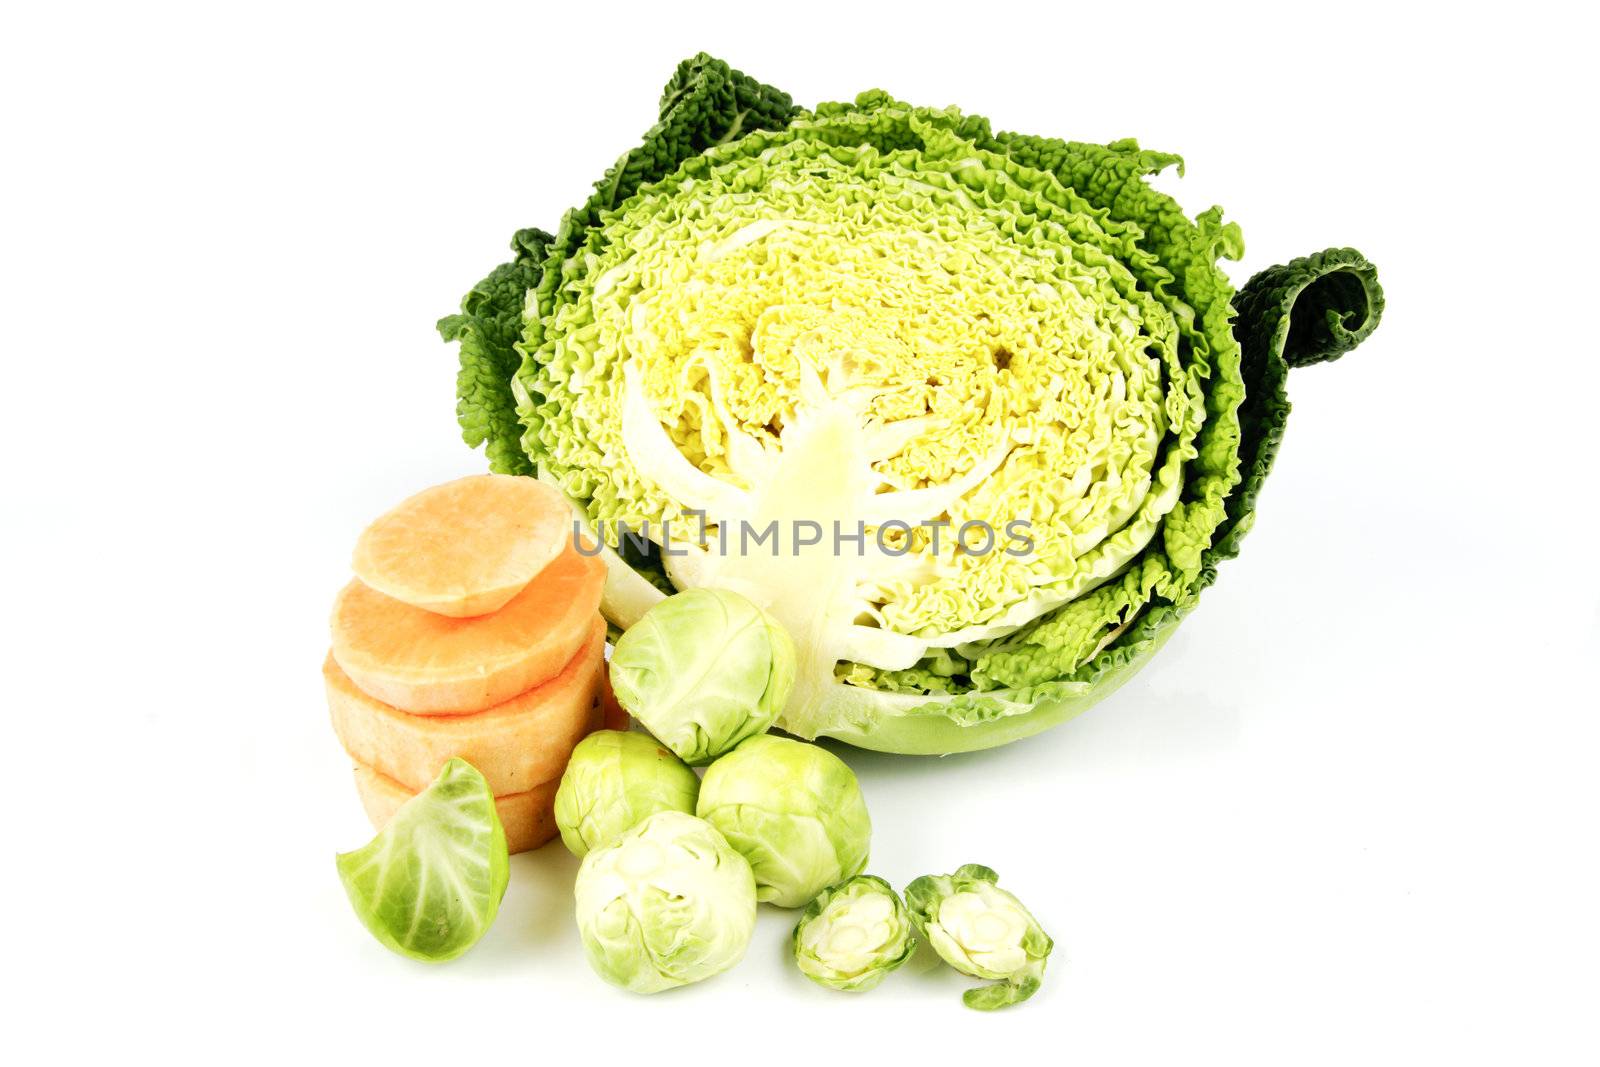 Half a raw green cabbage with slices of raw sweet potato and peeled green sprouts on a reflective white background